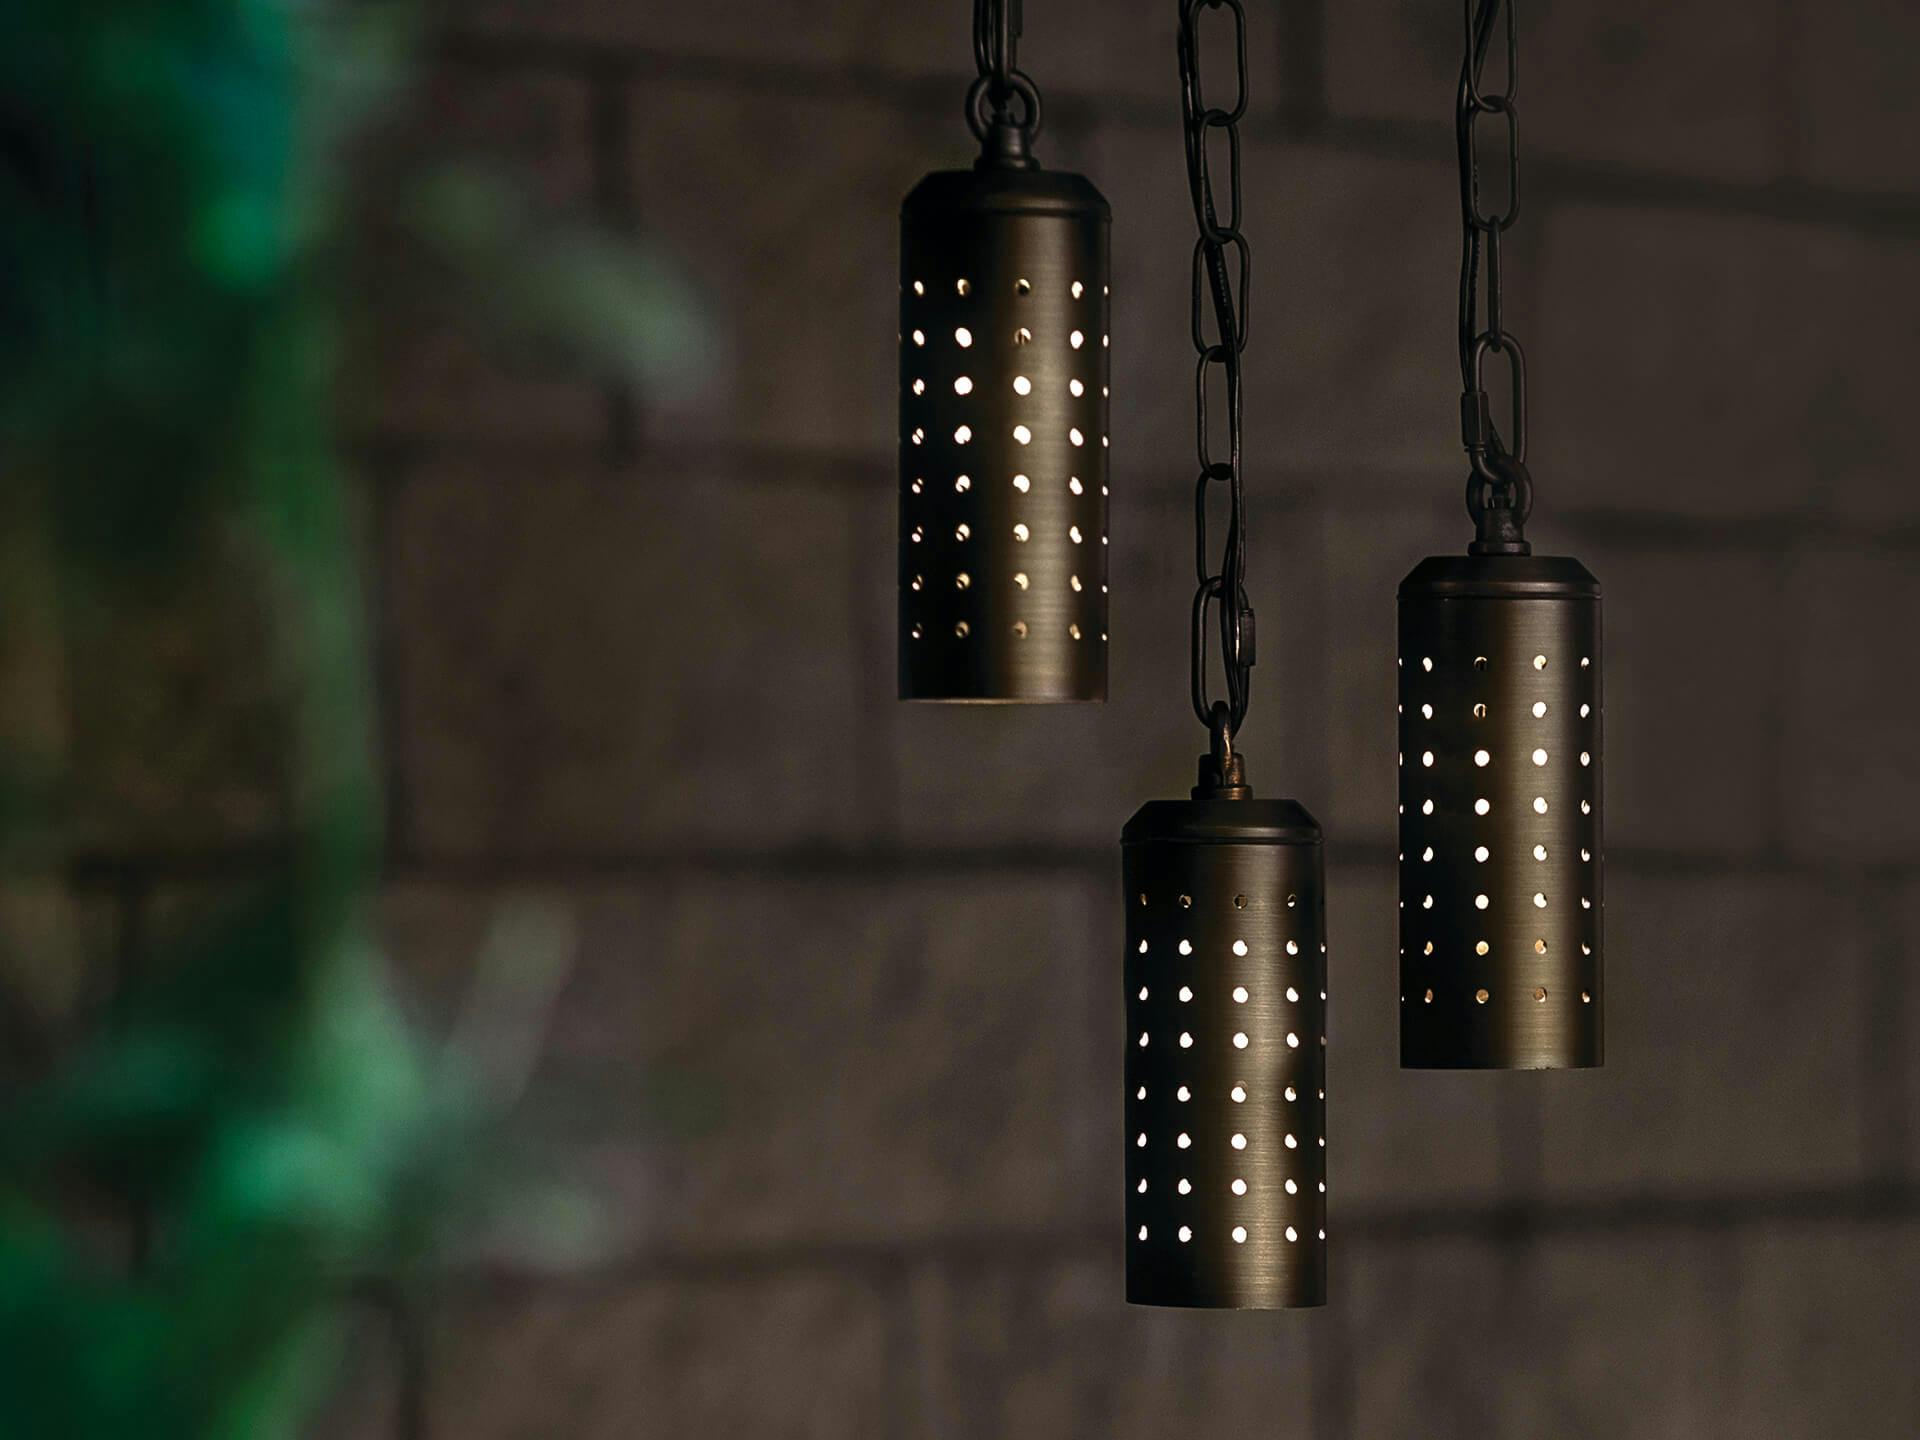 Three pendant lamps in brass finish at night